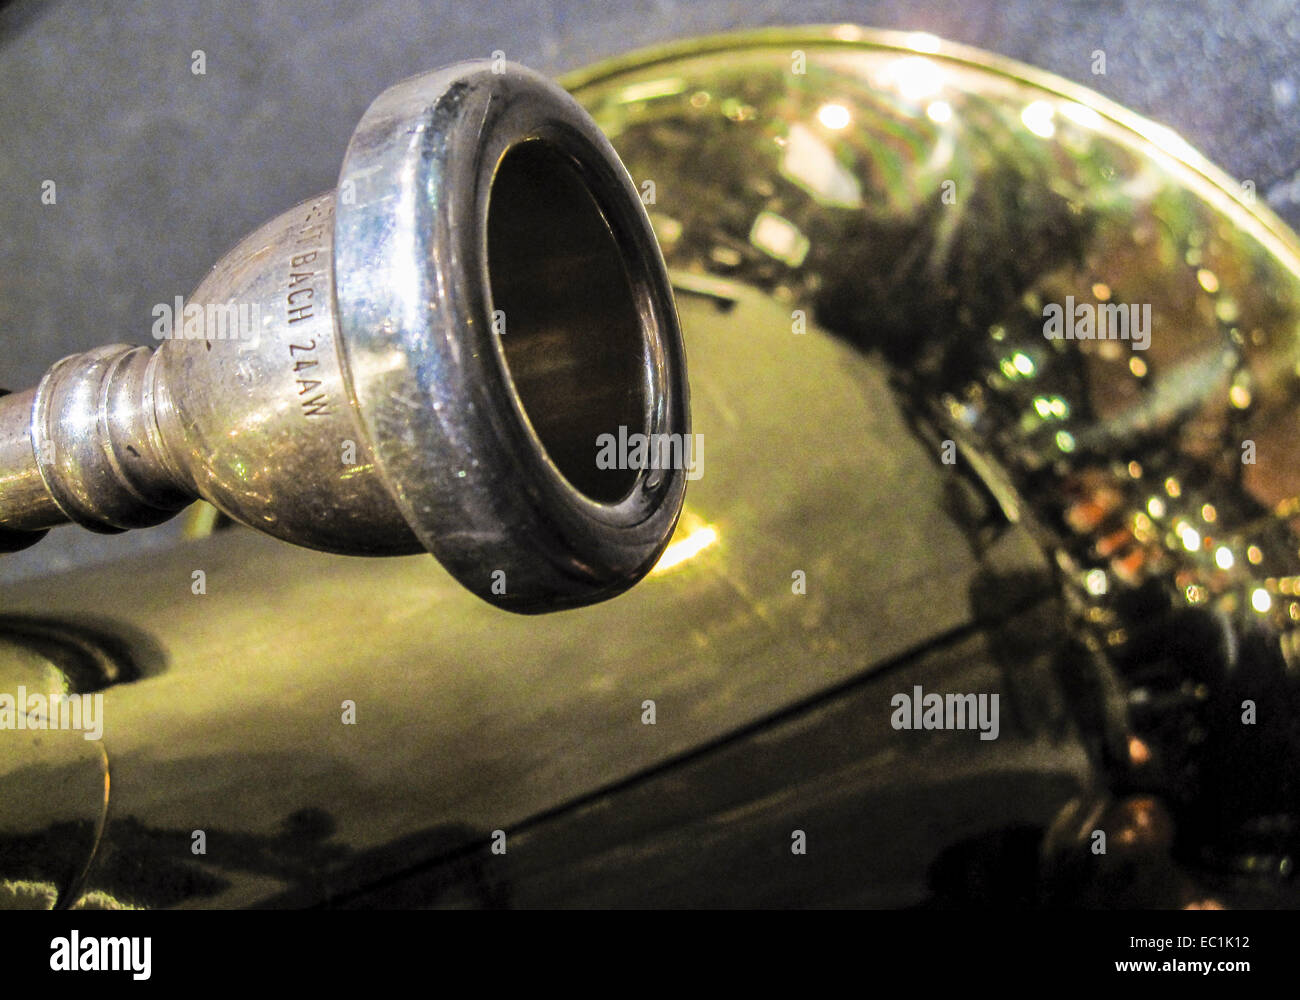 Tuba mouthpiece. Bach 24 AW model, on orchestral bass tuba. Close-up. The Vincent Bach 24AW tuba mouthpiece in silver-plate Stock Photo